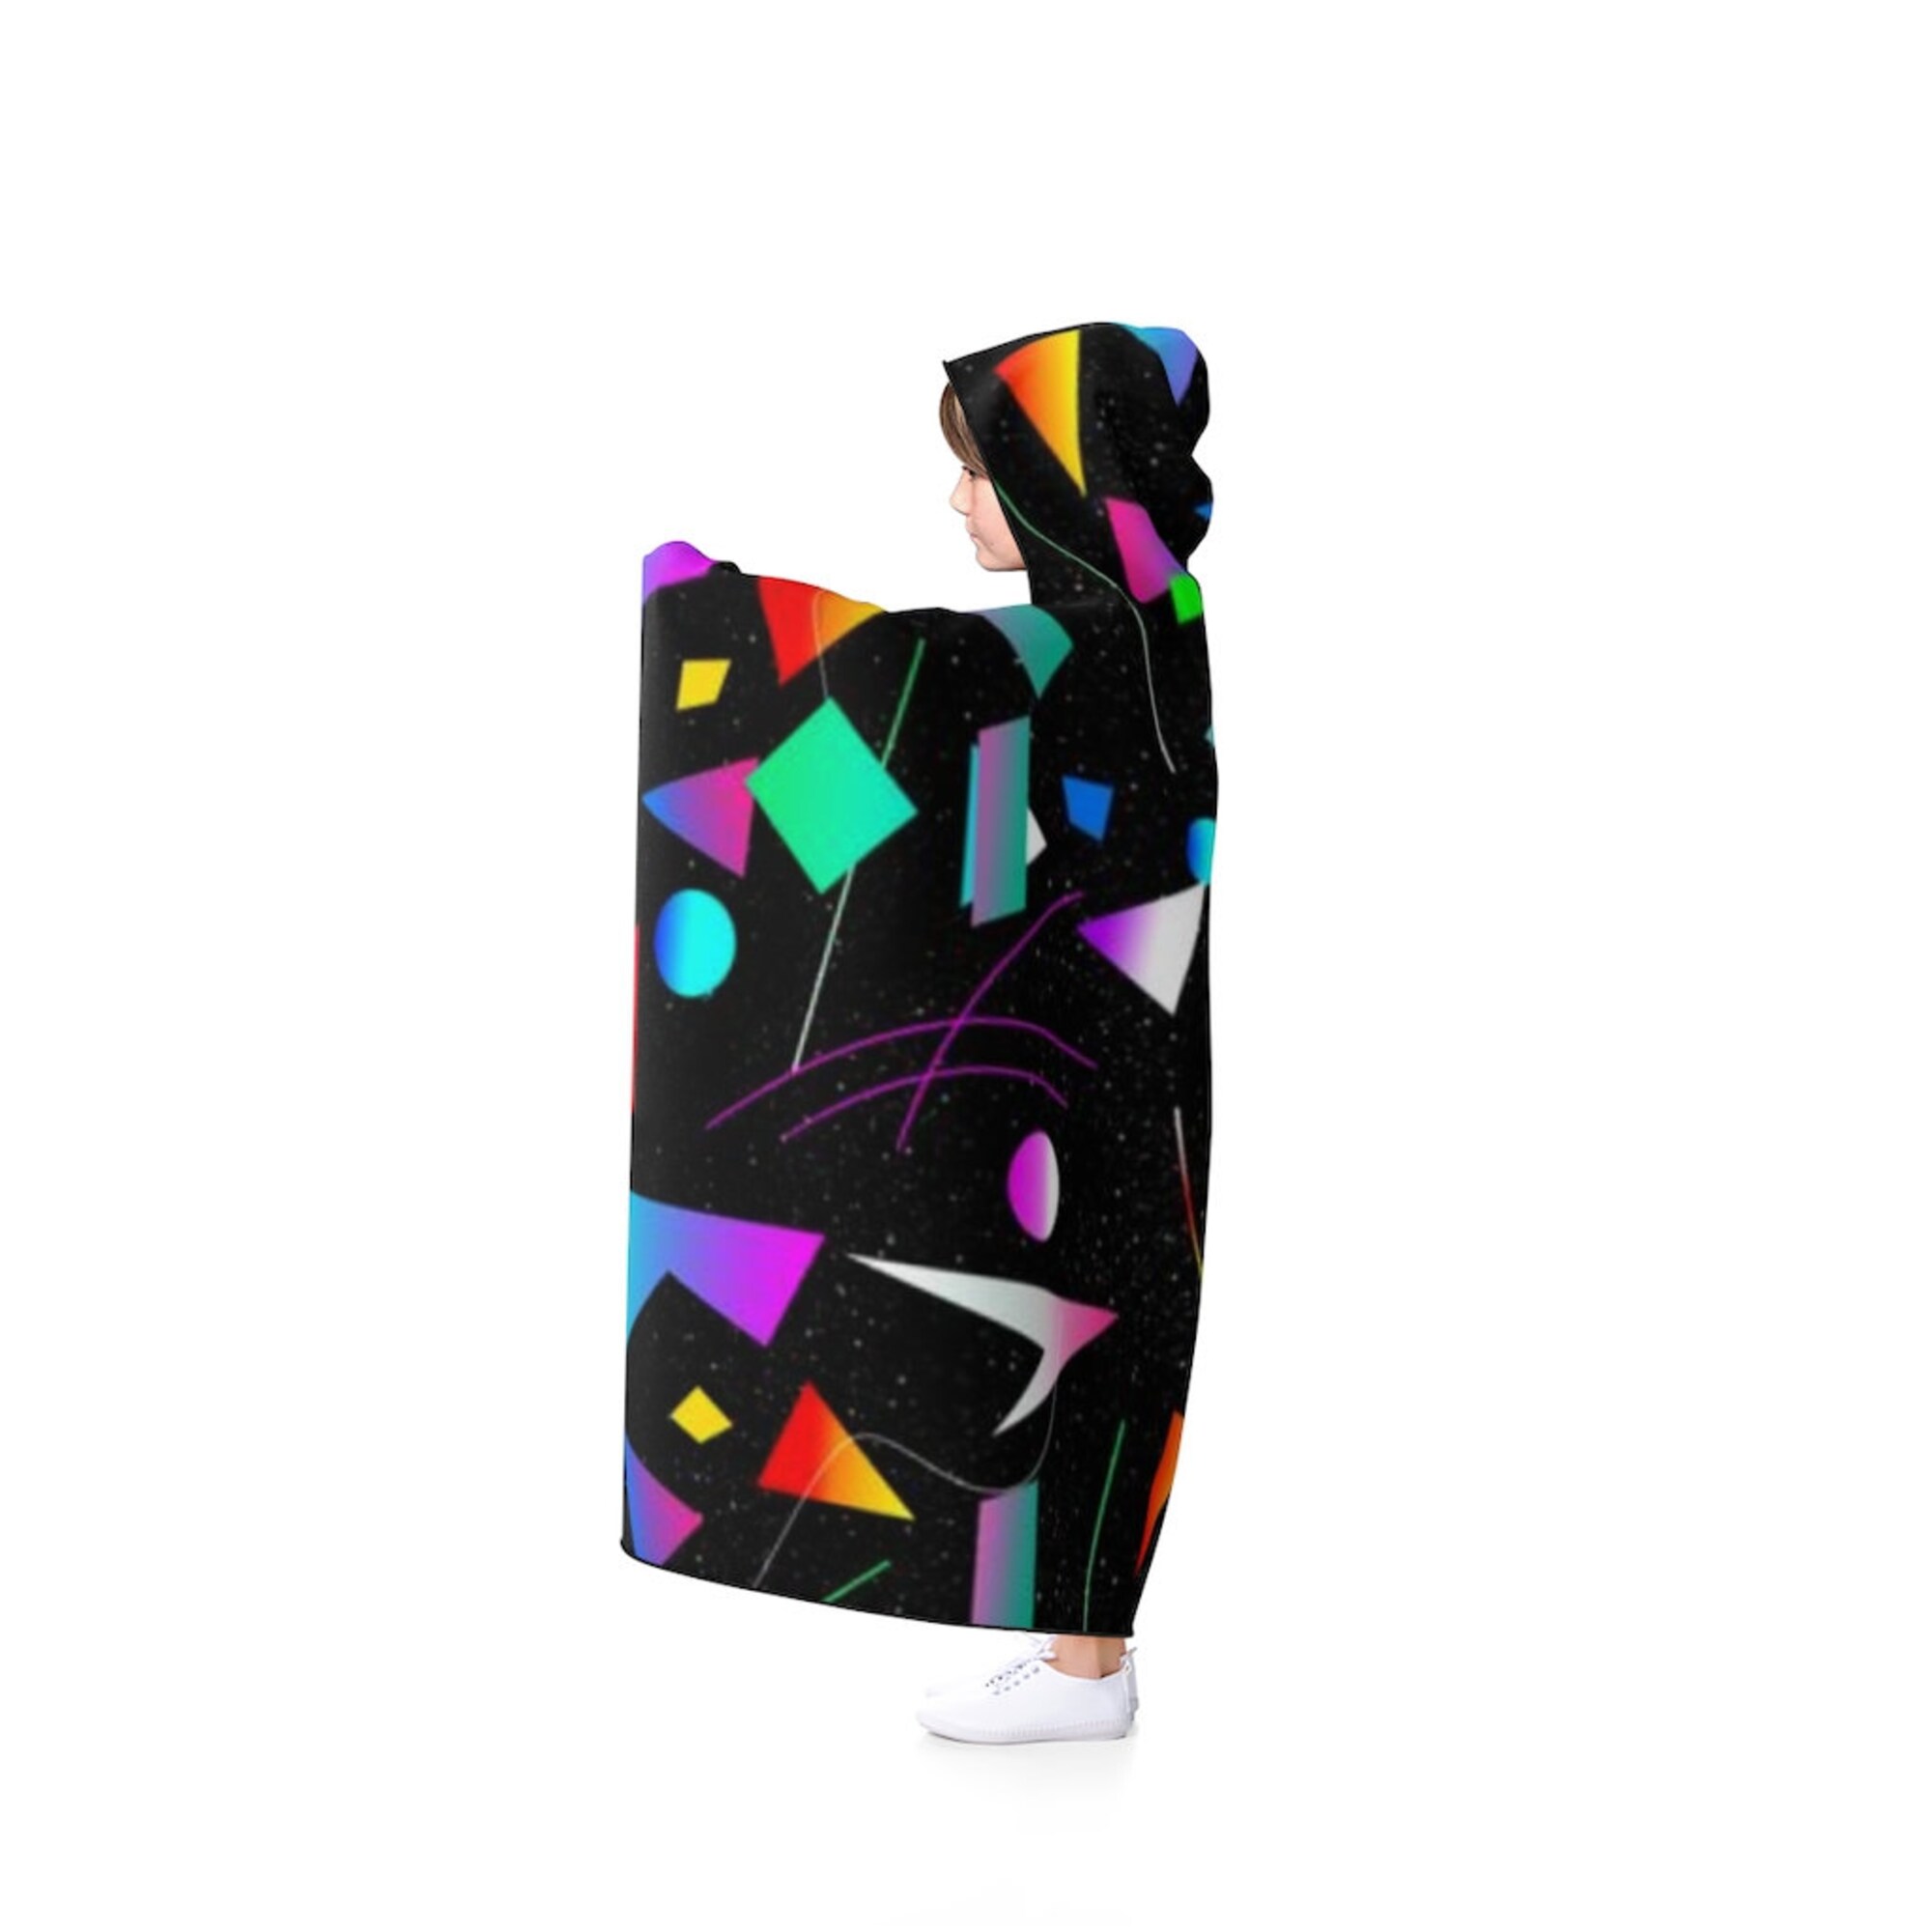 Black Hooded Blanket with an 80s Retro